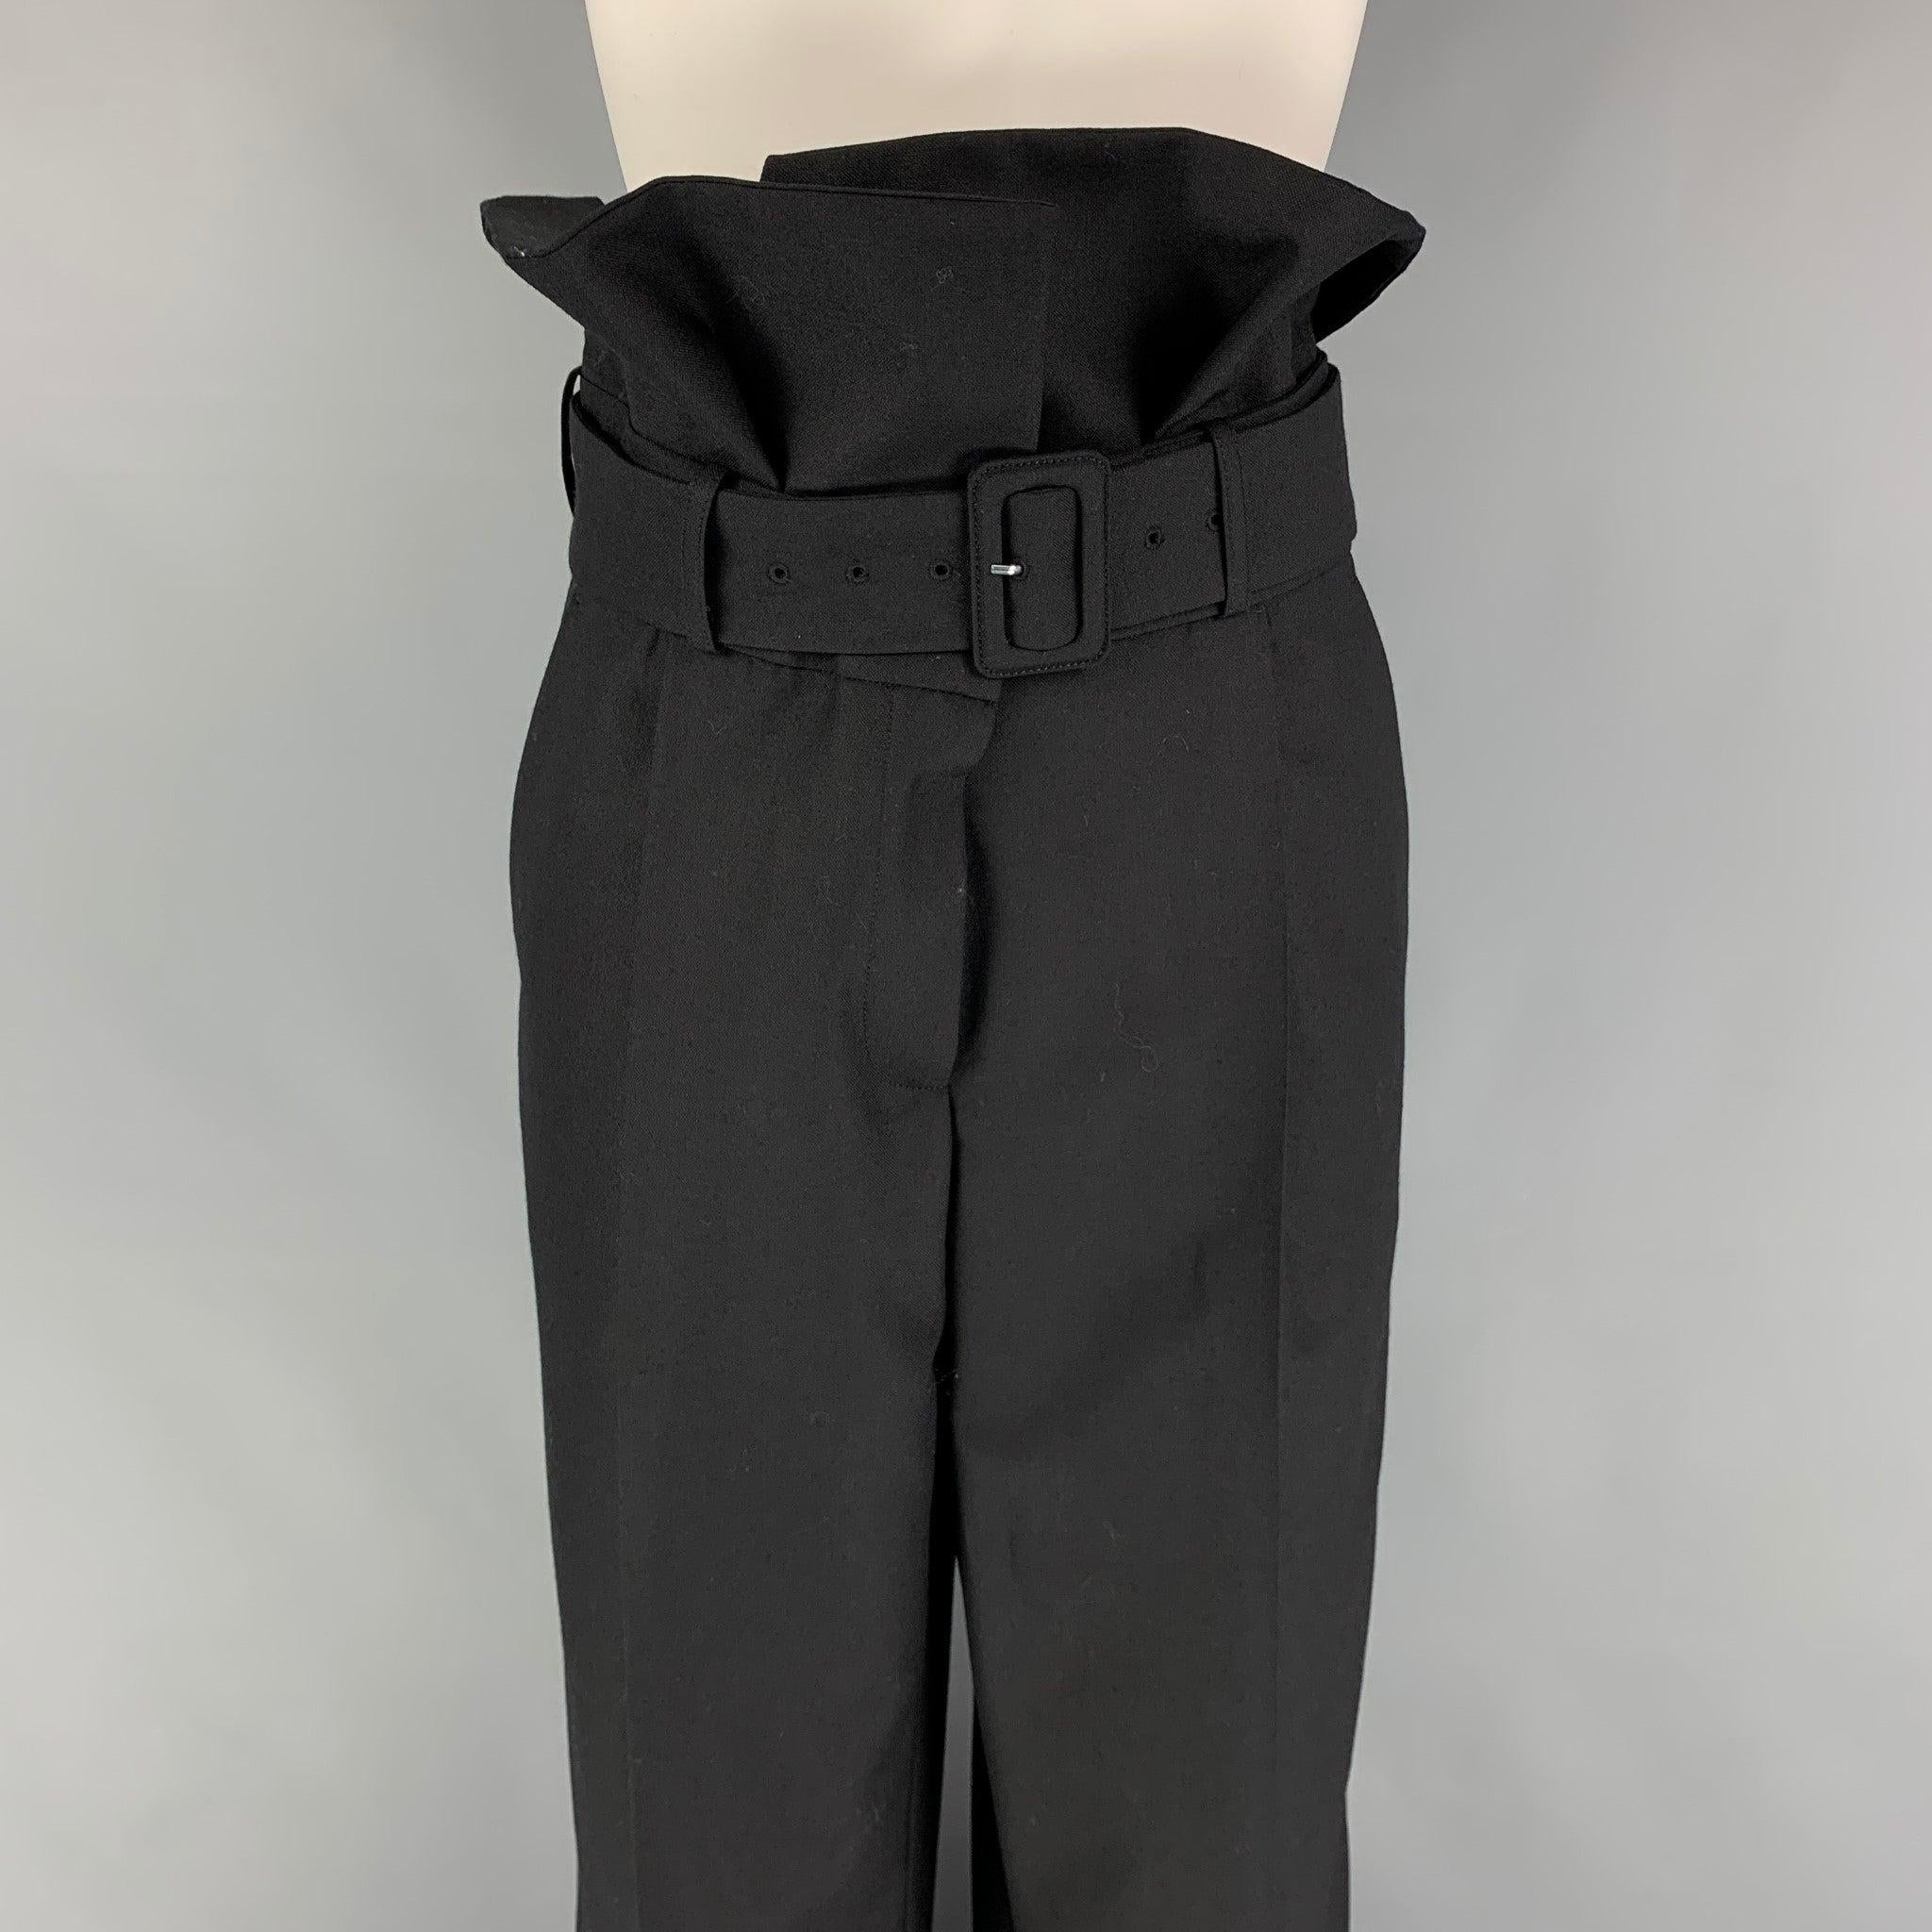 DRIES VAN NOTEN dress pants comes in a black wool featuring a high waisted style, belted, front tab, and a zip fly closure.New With Tags. 

Marked:   40 

Measurements: 
  Waist: 32 inches  Rise: 16 inches  Inseam: 35 inches 
  
  
 
Reference: